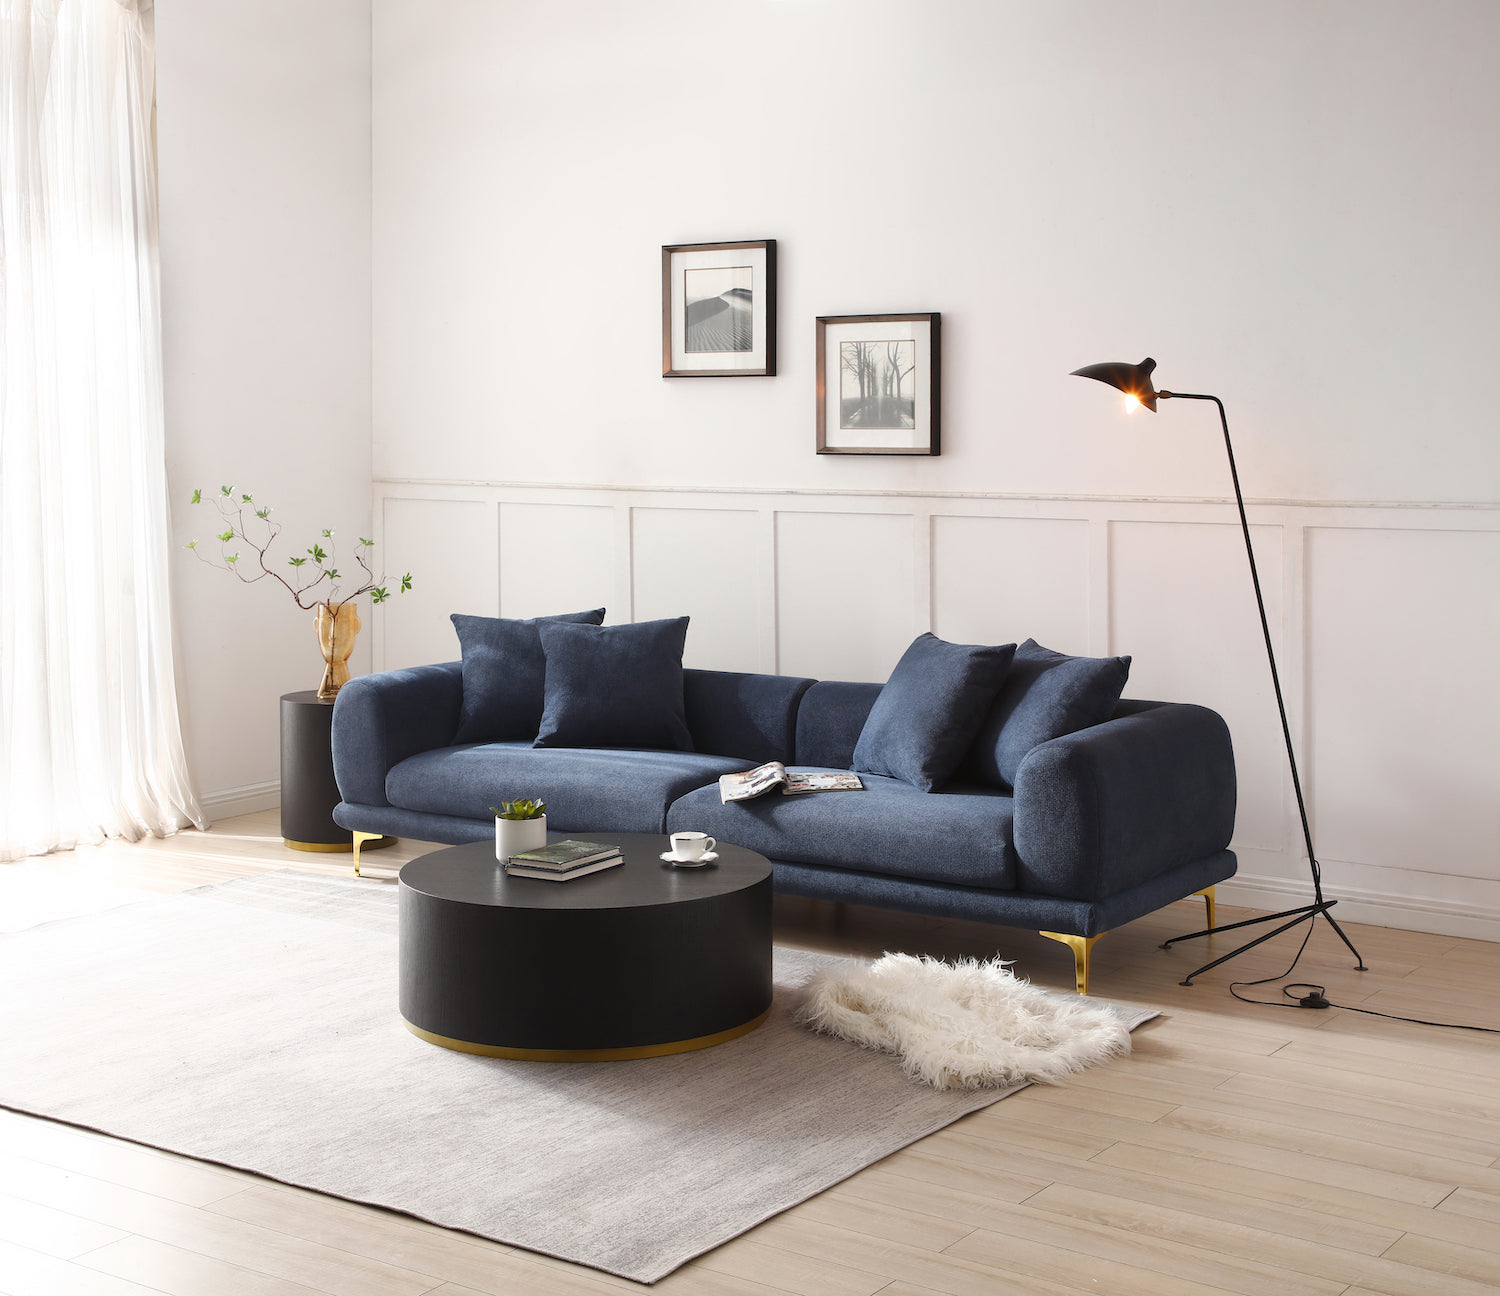 Justone 108.3" Mid-Century Modern Upholstered Sofa in Blue